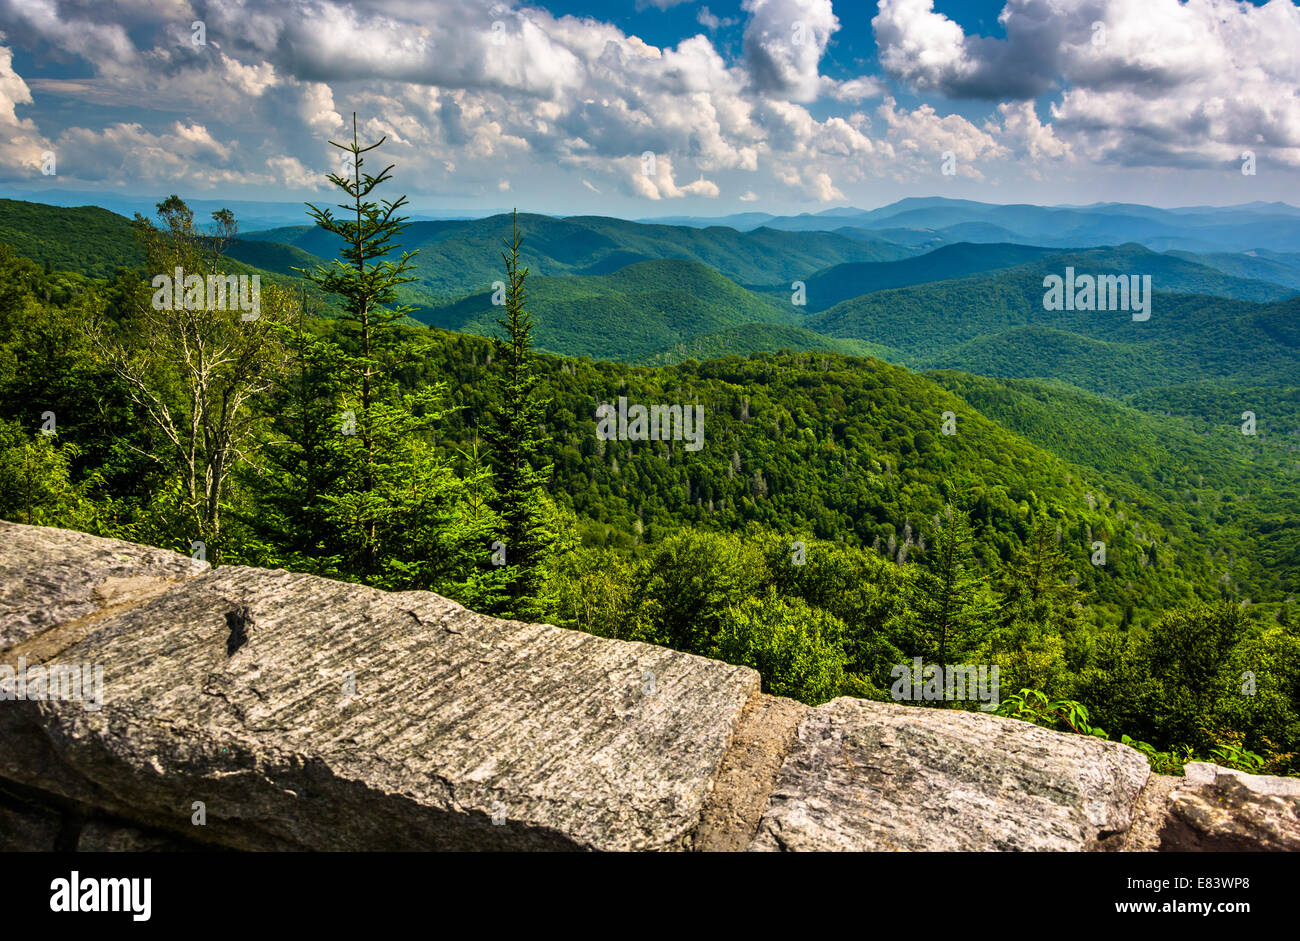 View of Appalachian Mountains from the Blue Ridge Parkway in North Carolina. Stock Photo